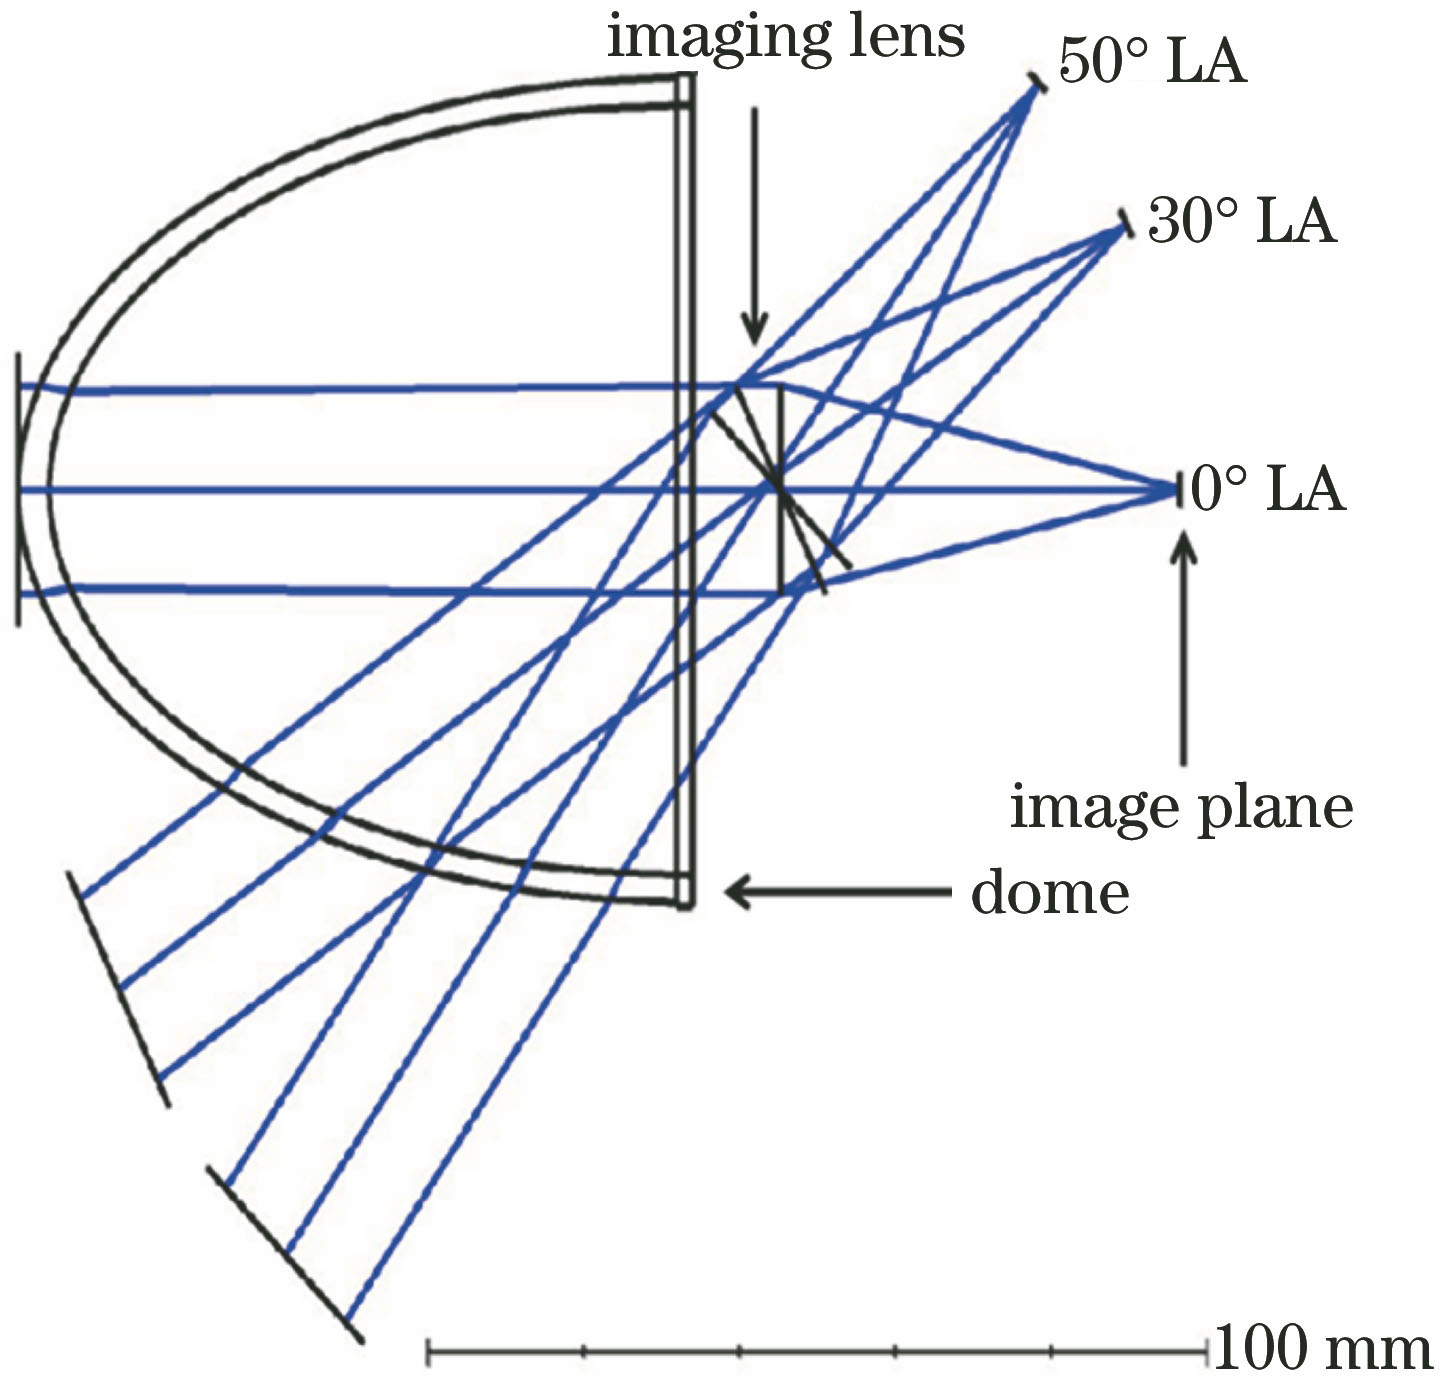 Initial structure of the LA superposition of the conformal optical system